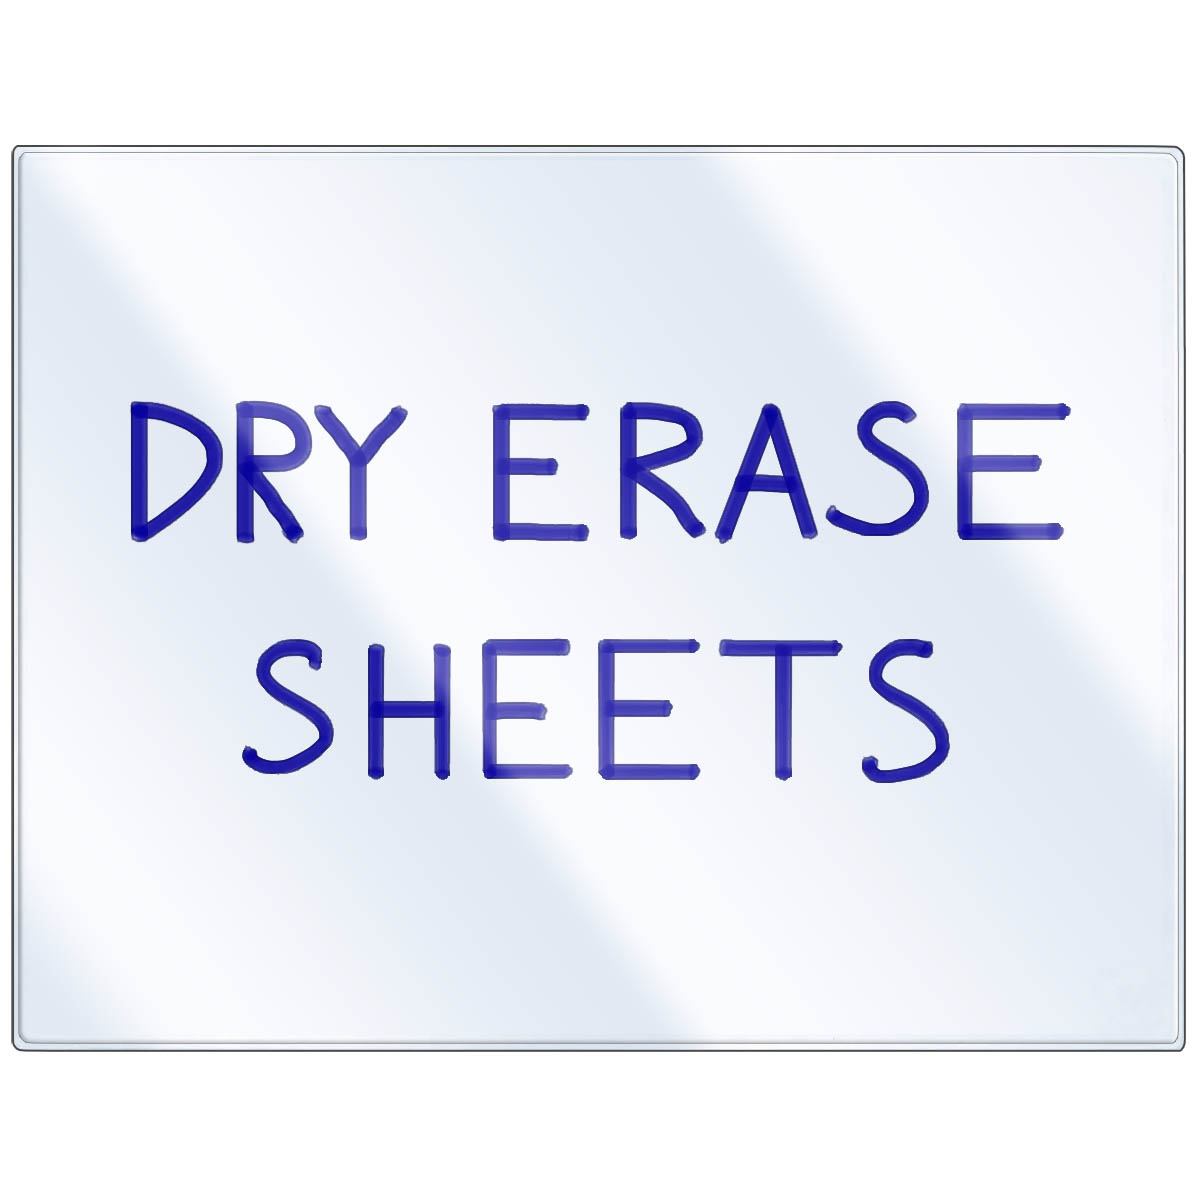 Magnetic Dry Erase Magnet Sheet 8.5 x 11 Write on Wipe Off